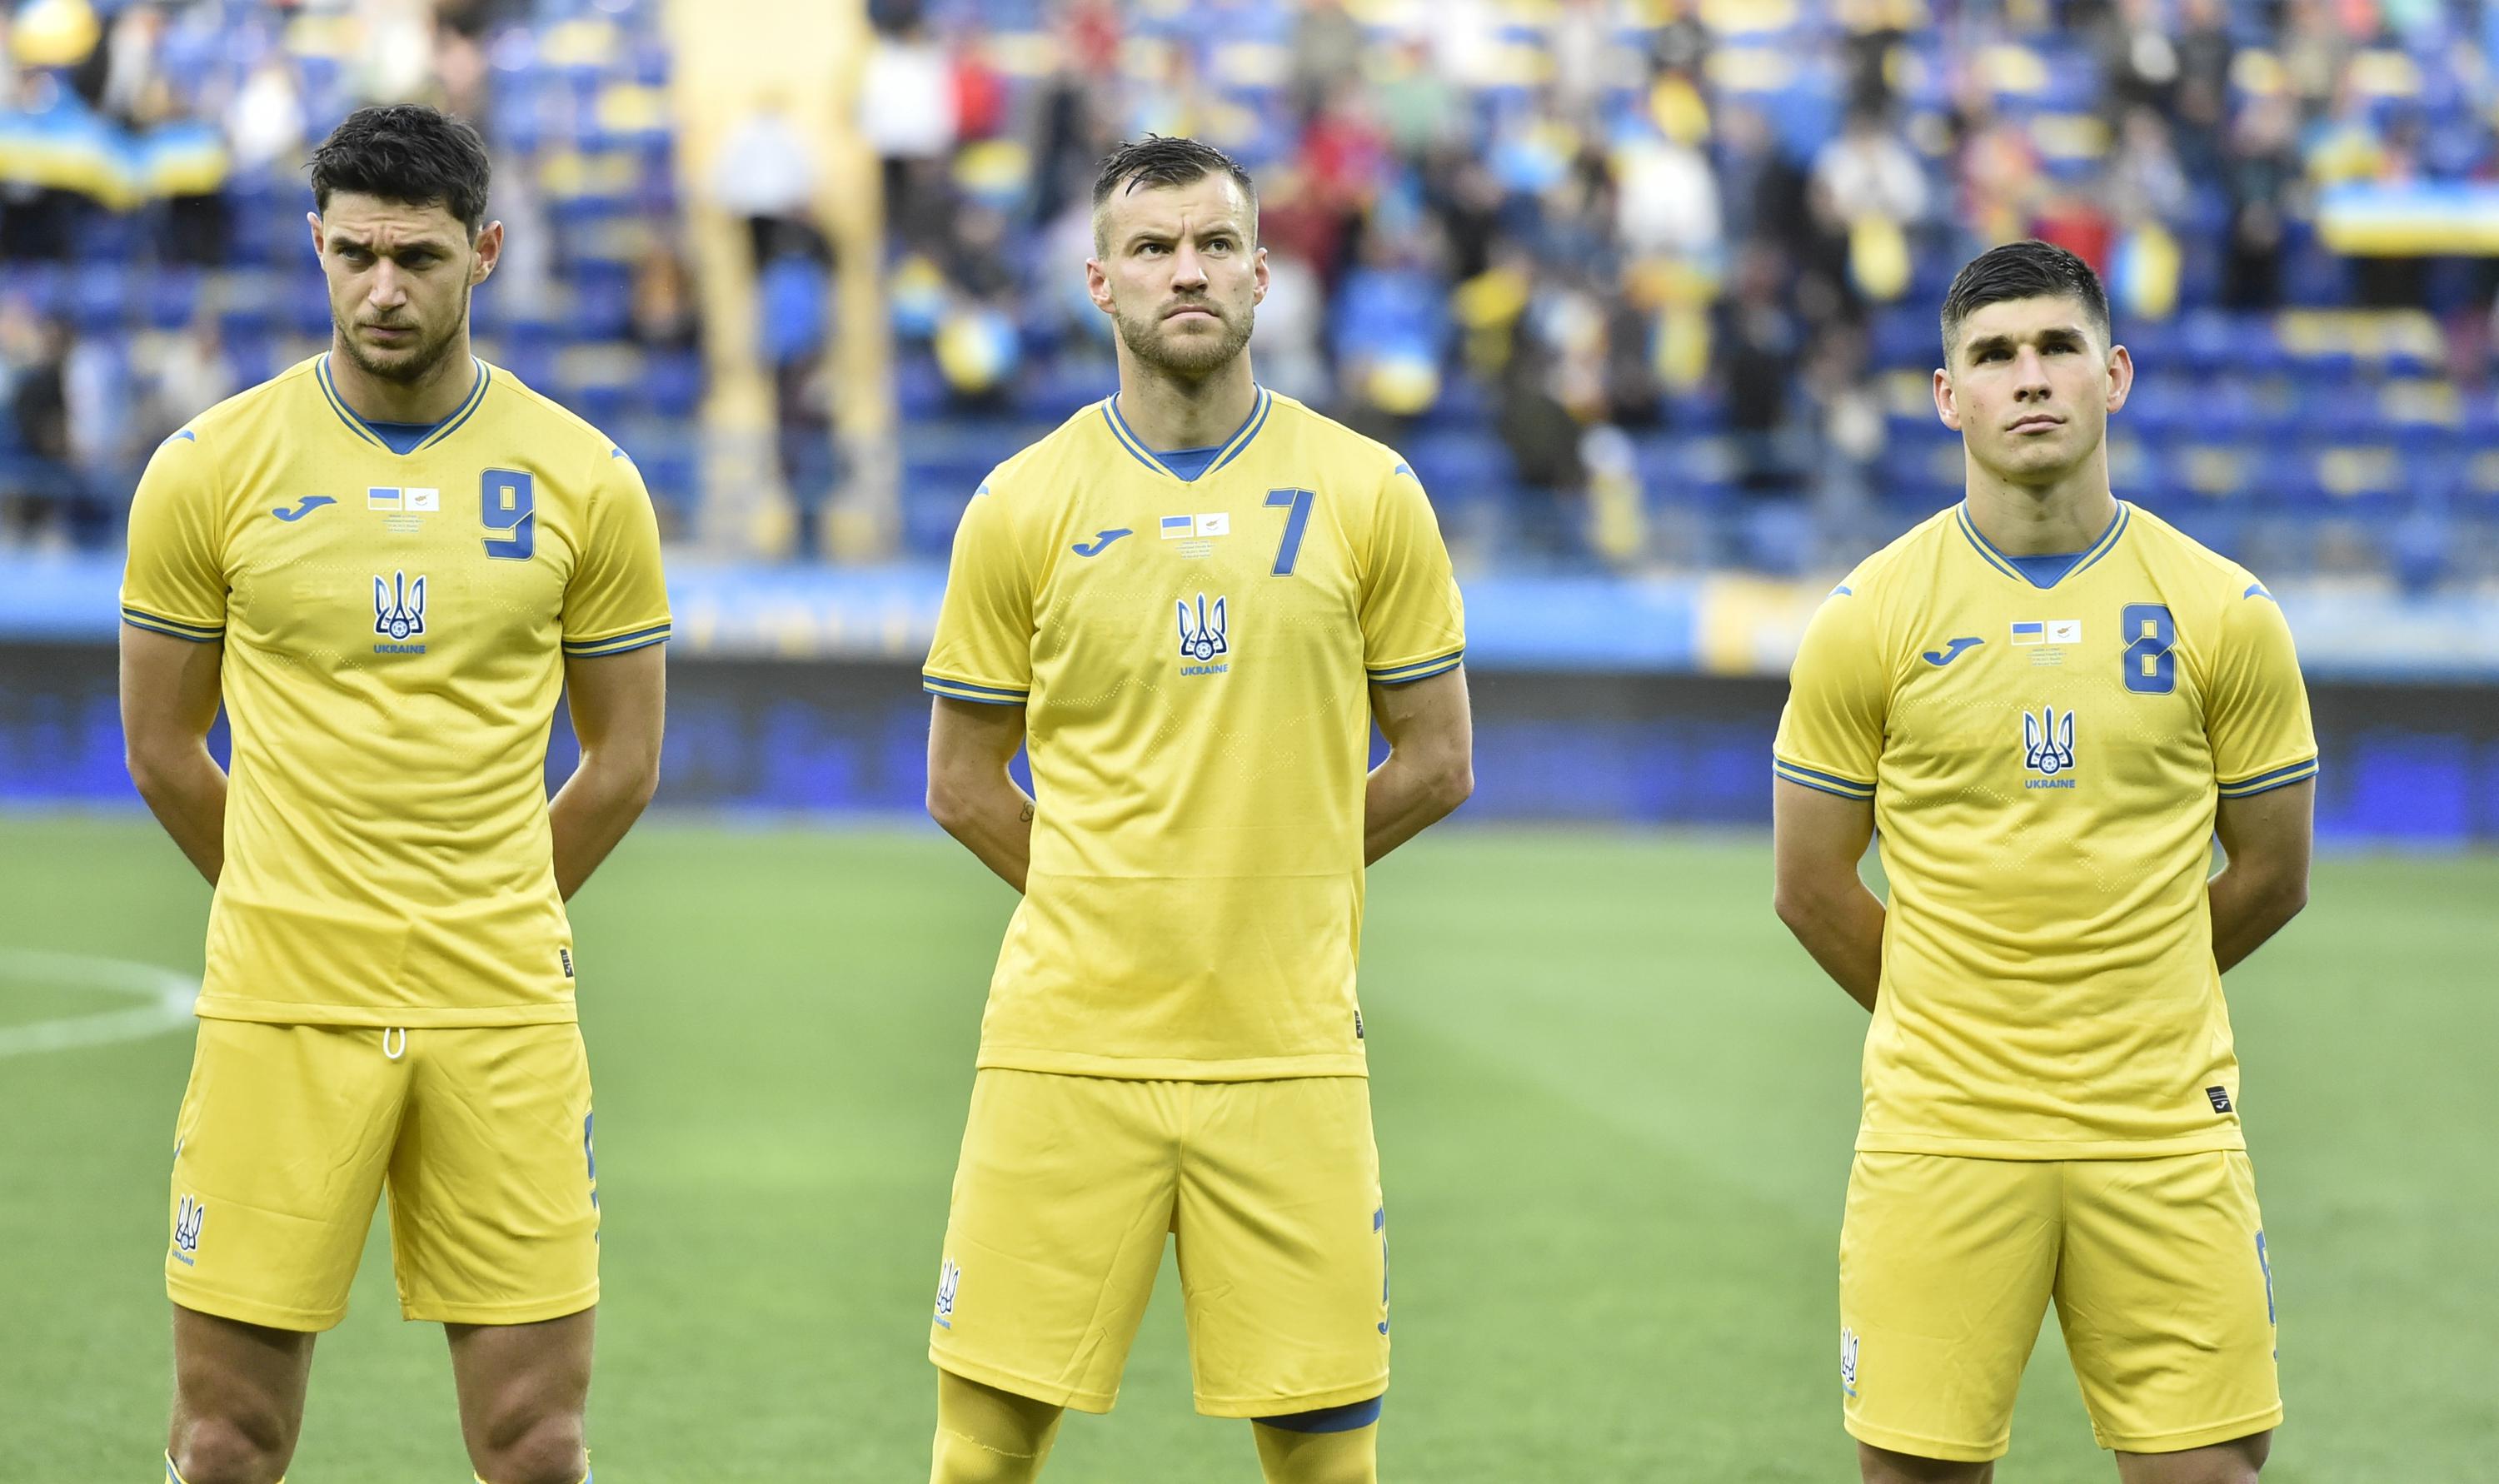 Russia chafes at Ukrainian team's shirt for Euro 2020